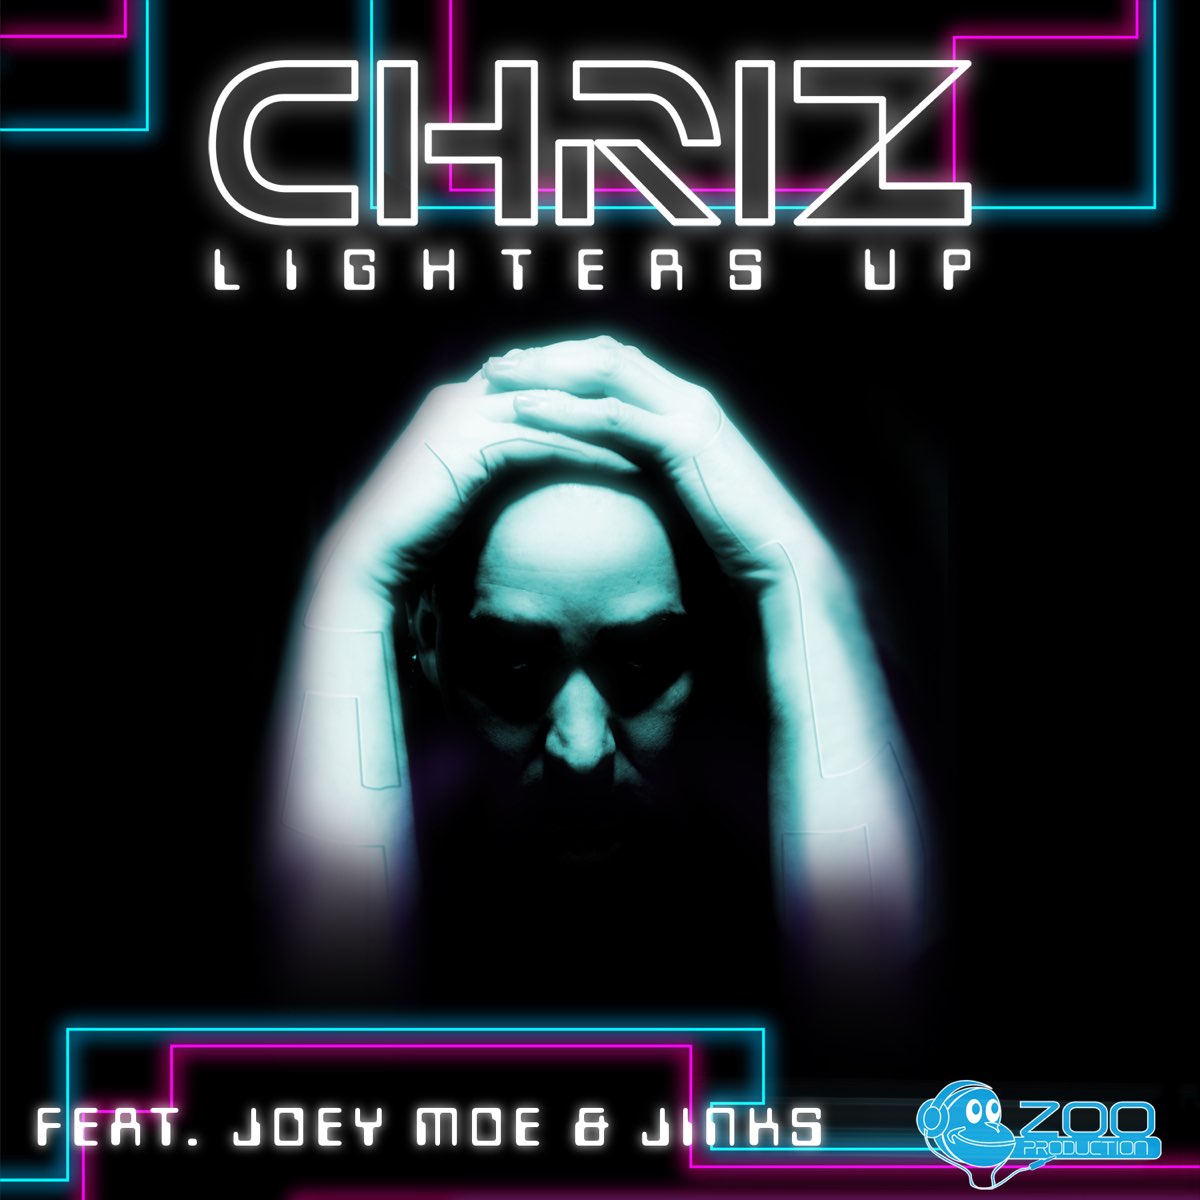 Lighters Up by Chriz Apple